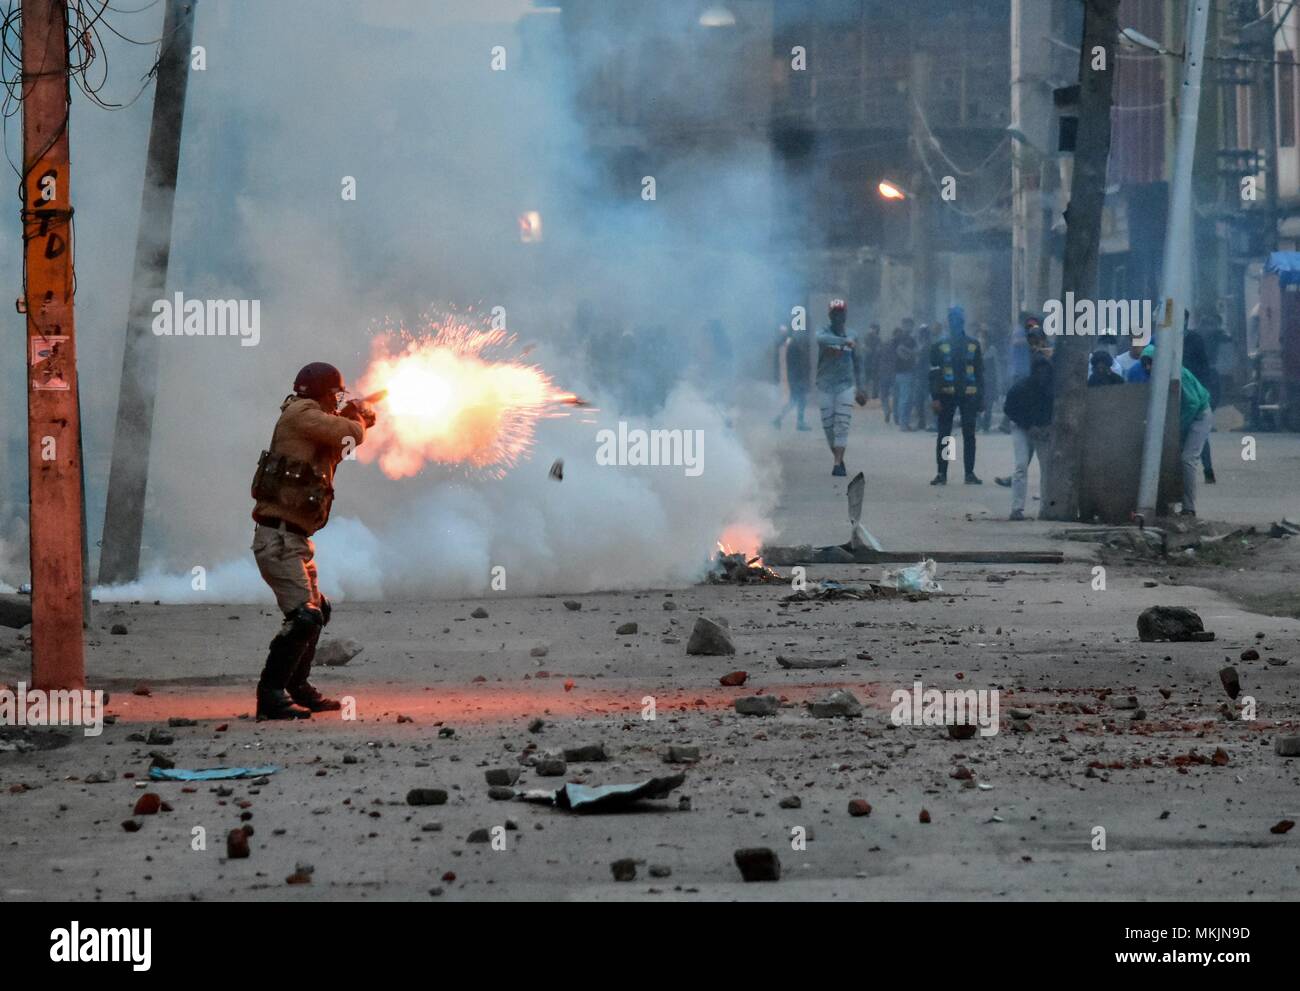 Srinagar, Kashmir. 8th May 2018. An policeman fire tear gas shell towards Kashmiri protesters during clashes in Srinagar, Kashmir. Fierce clashes broke out between government forces and Kashmiri protesters in Srinagar on Tuesday as the valley continued to remain tense over the killing of 11 people including 5 militants and 6 civilians in Kashmir. Police used tear smoke shells and shot gun pellets to disperse hundreds of demonstrators who hurled rocks and chanted anti-and pro-freedom slogans. Credit: SOPA Images Limited/Alamy Live News Stock Photo